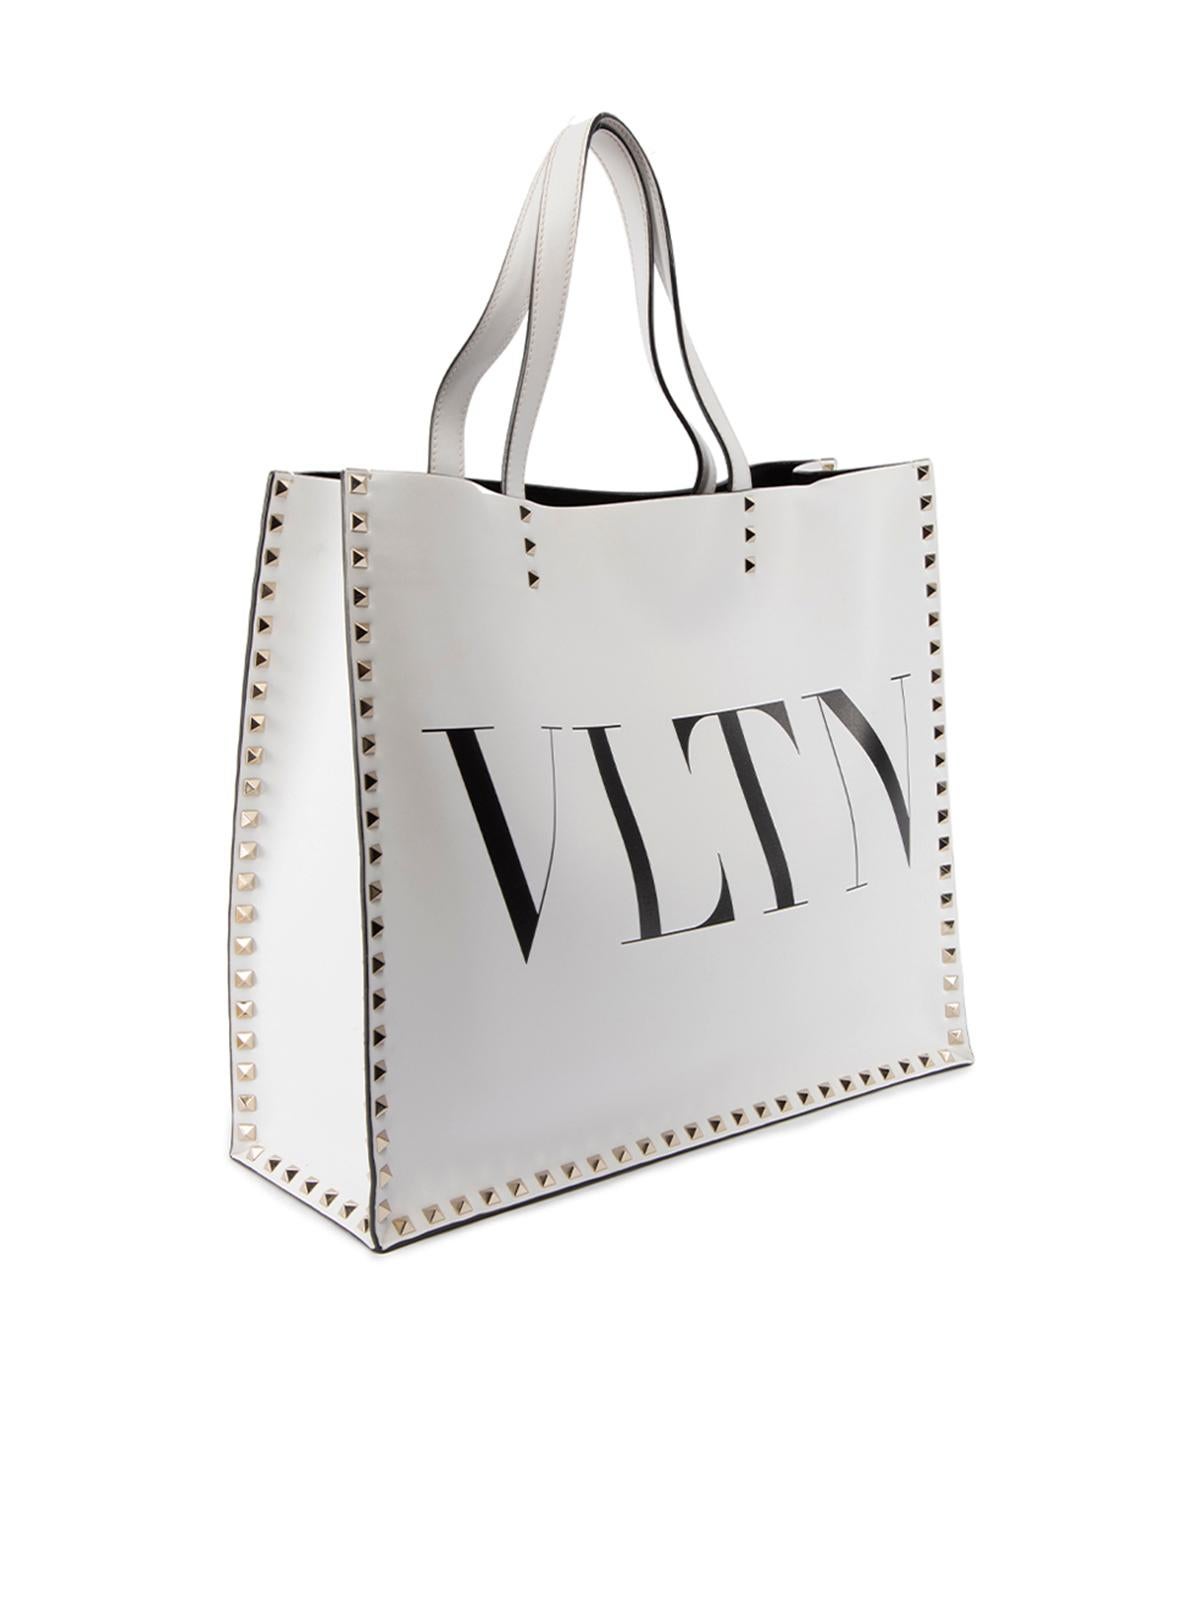 CONDITION is Very good. Minimal wear to bag is evident. There a few light marks seen at the back and bottom of bag on this used Valentino designer resale item. This item comes with the original dustbag. Details White Leather Tote bag Silver tone